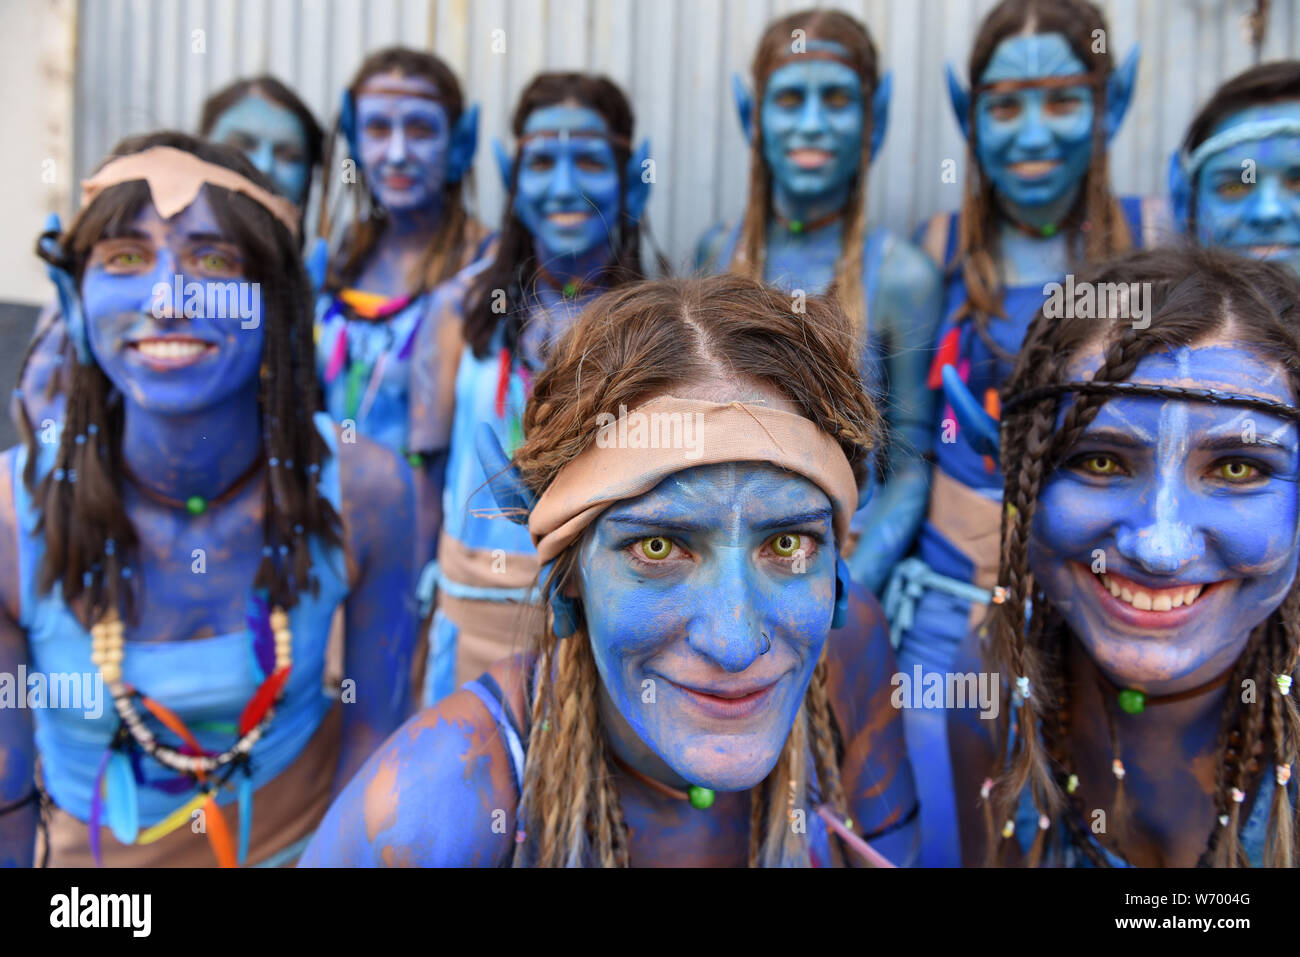 Revellers are seen posing for a picture during the festival.Hundreds of revellers celebrate the XV La Juventud festival in Almazán, north of Spain, wearing funny costumes based on famous video games. During the month of August, the main holiday month in Spain, thousands of villages and cities celebrate their fiestas (festivals). Stock Photo